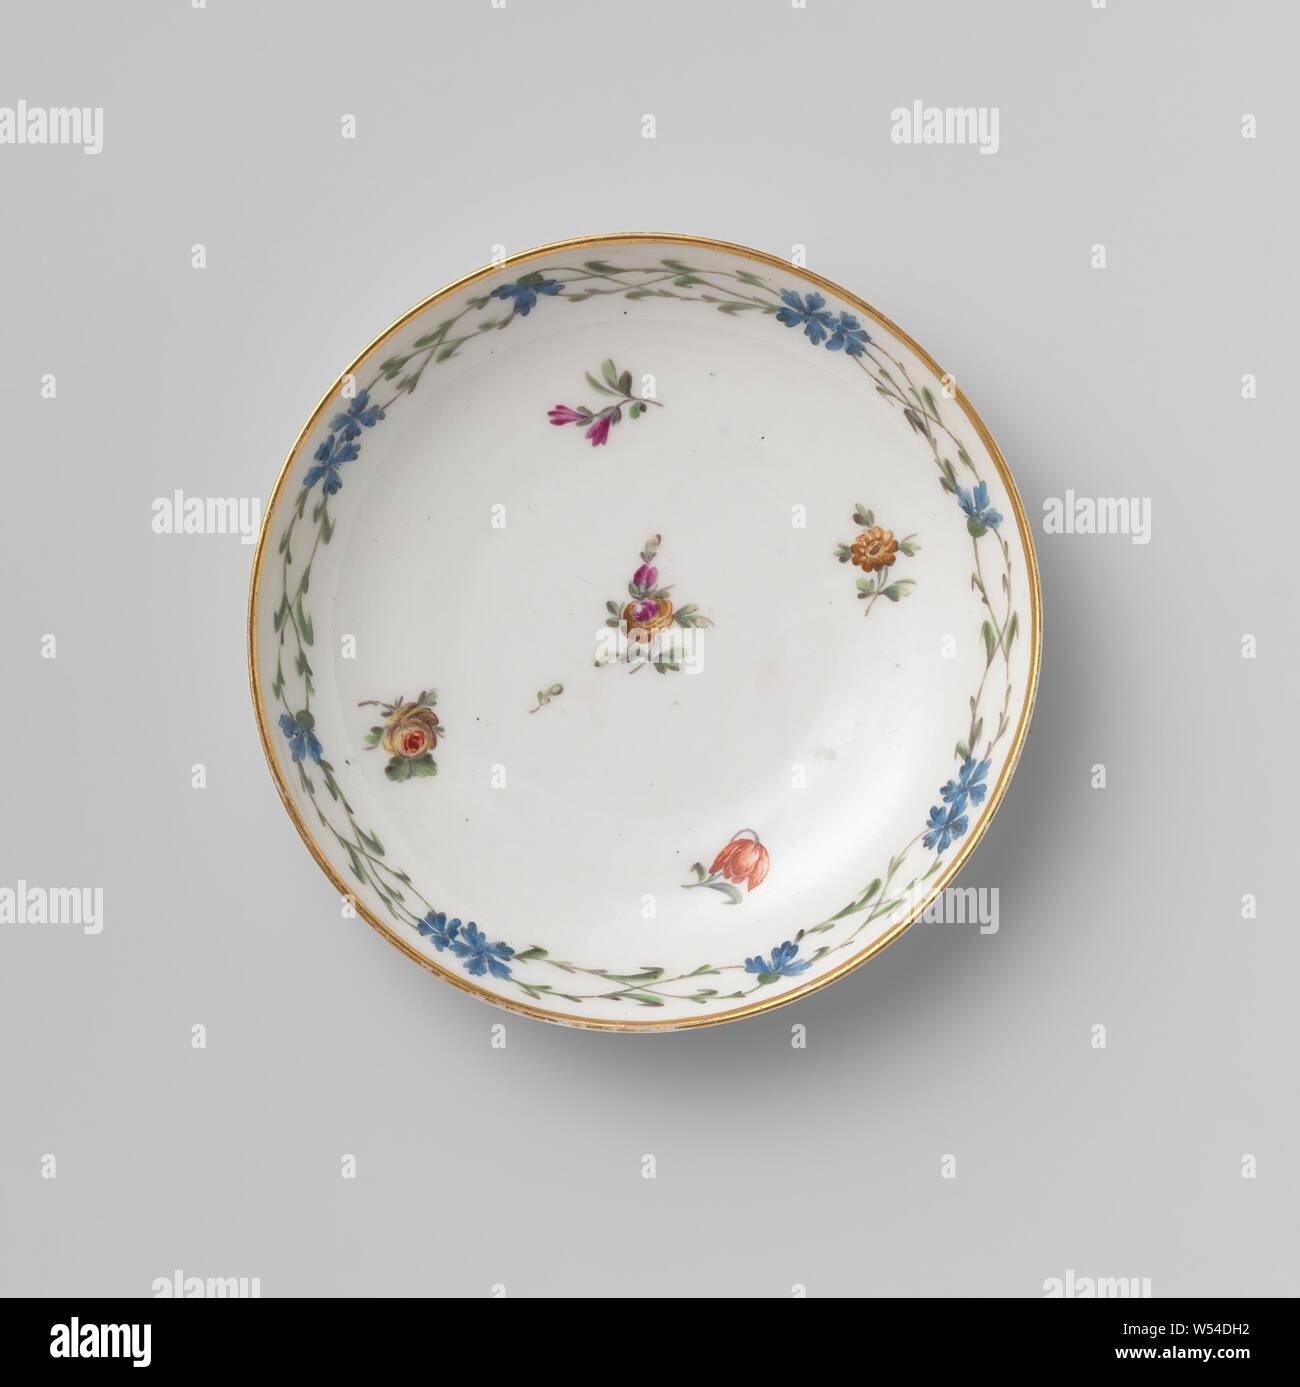 Porcelain dish, Painted with a border with cornflowers and loose flower sprays., Manufactuur Oud-Loosdrecht, Loosdrecht, 1774 - 1784, porcelain (material), d 12.0 cm × h 2.9 cm Stock Photo